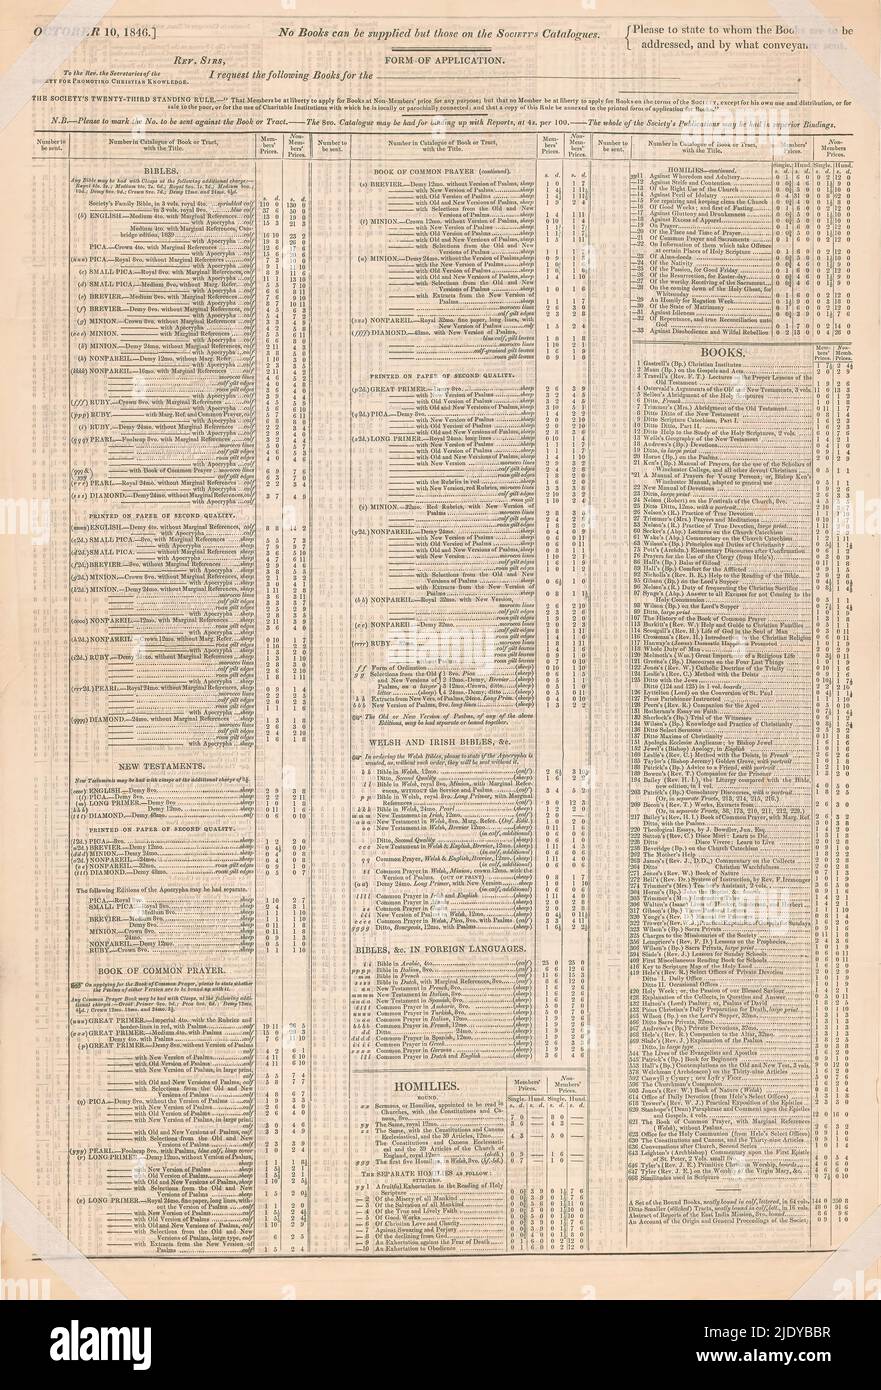 Fund list of the Society for Promoting Christian Knowledge., publisher: Society for Promoting Christian Knowledge, (mentioned on object), London, Oct-1846, paper, letterpress printing, height 500 mm × width 350 mm Stock Photo